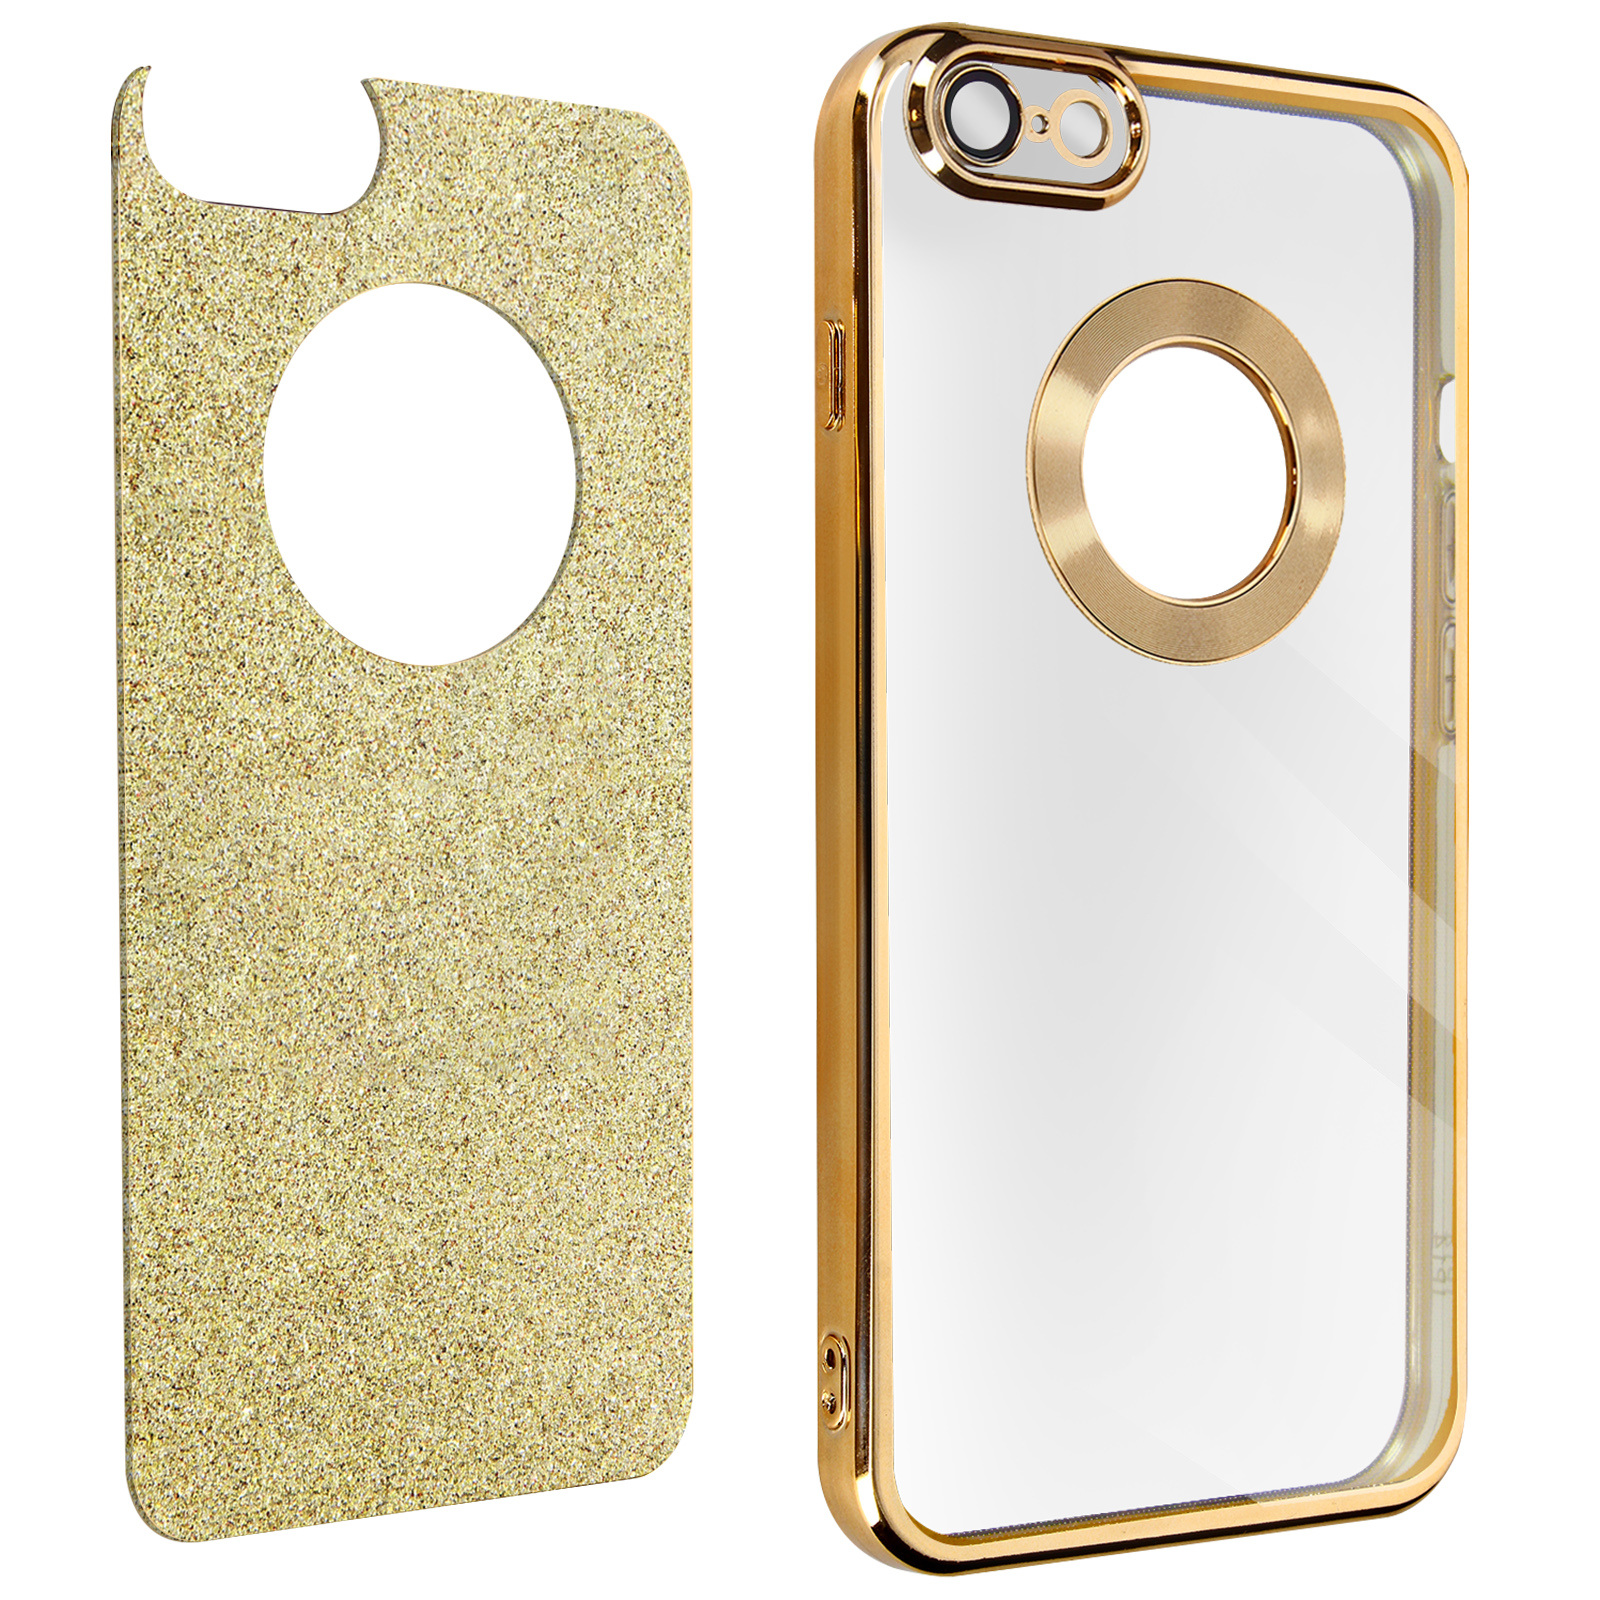 AVIZAR Protecam Spark Series, Gold iPhone 6S Plus, Backcover, Apple